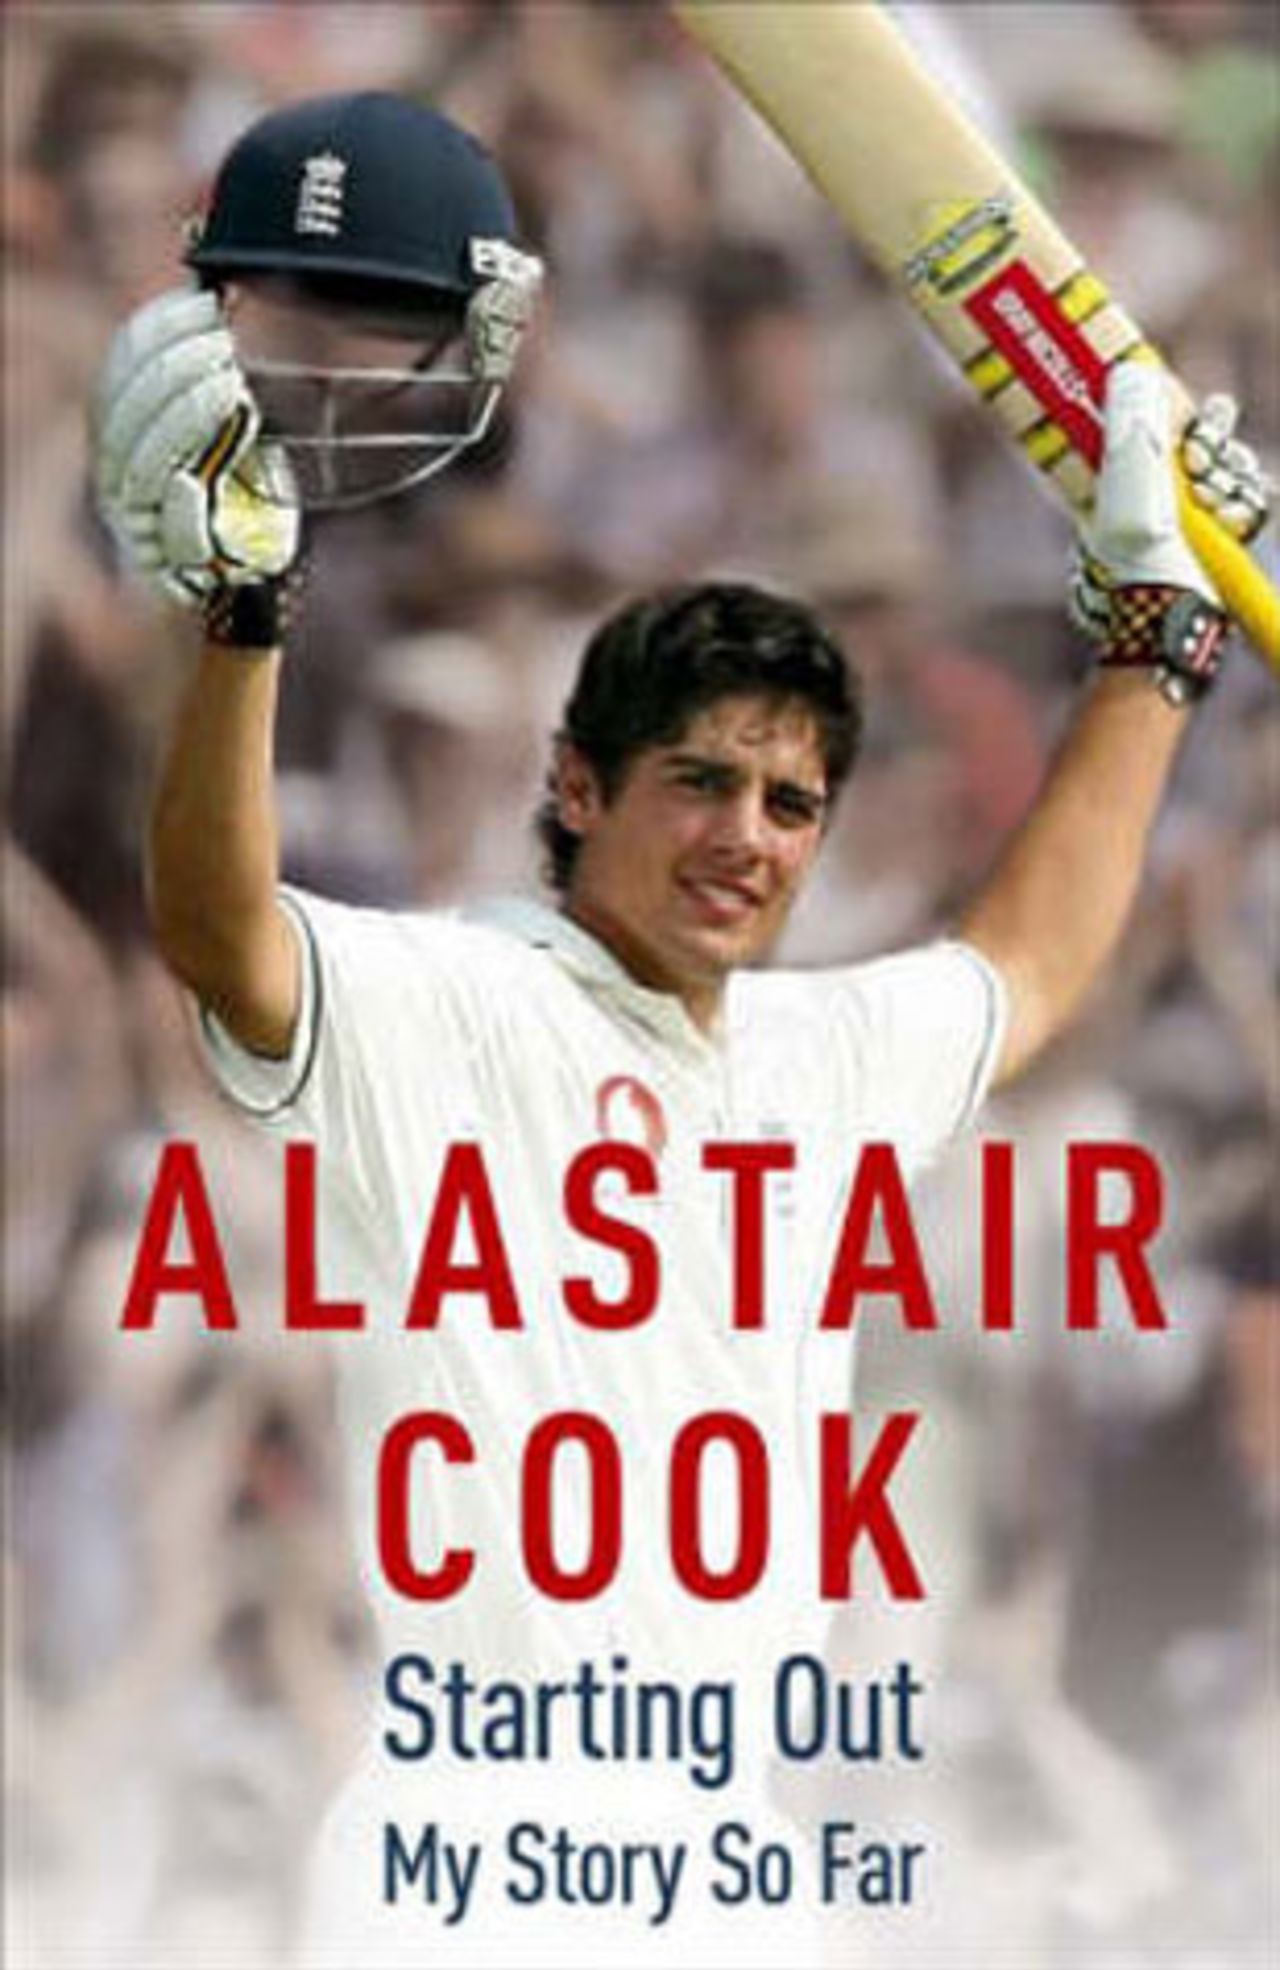 Starting Out: My Story So Far, by Alastair Cook